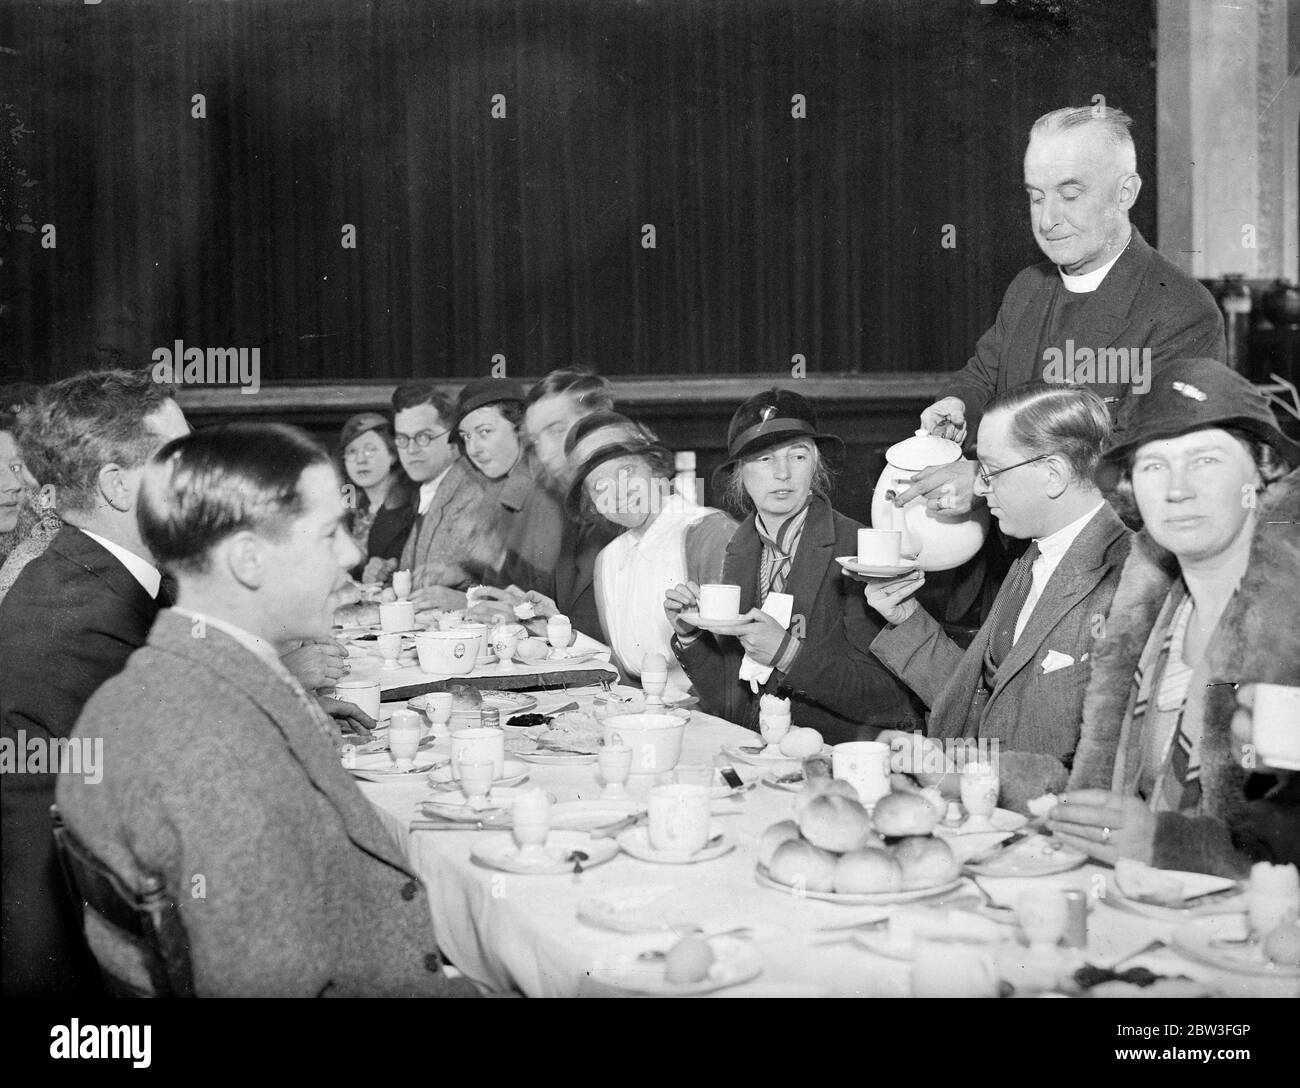 Vicar of St John ' s Church , Hampton , Wick , Middlesex , provides free breakfasts for his early morning flock . Photo shows ; The vicar ( the Reverend A Meyrick Johnson ) helping one of his parishioners to a cup of coffee at the free breakfast provided after Holy Communion . . 27 January 1935 Stock Photo